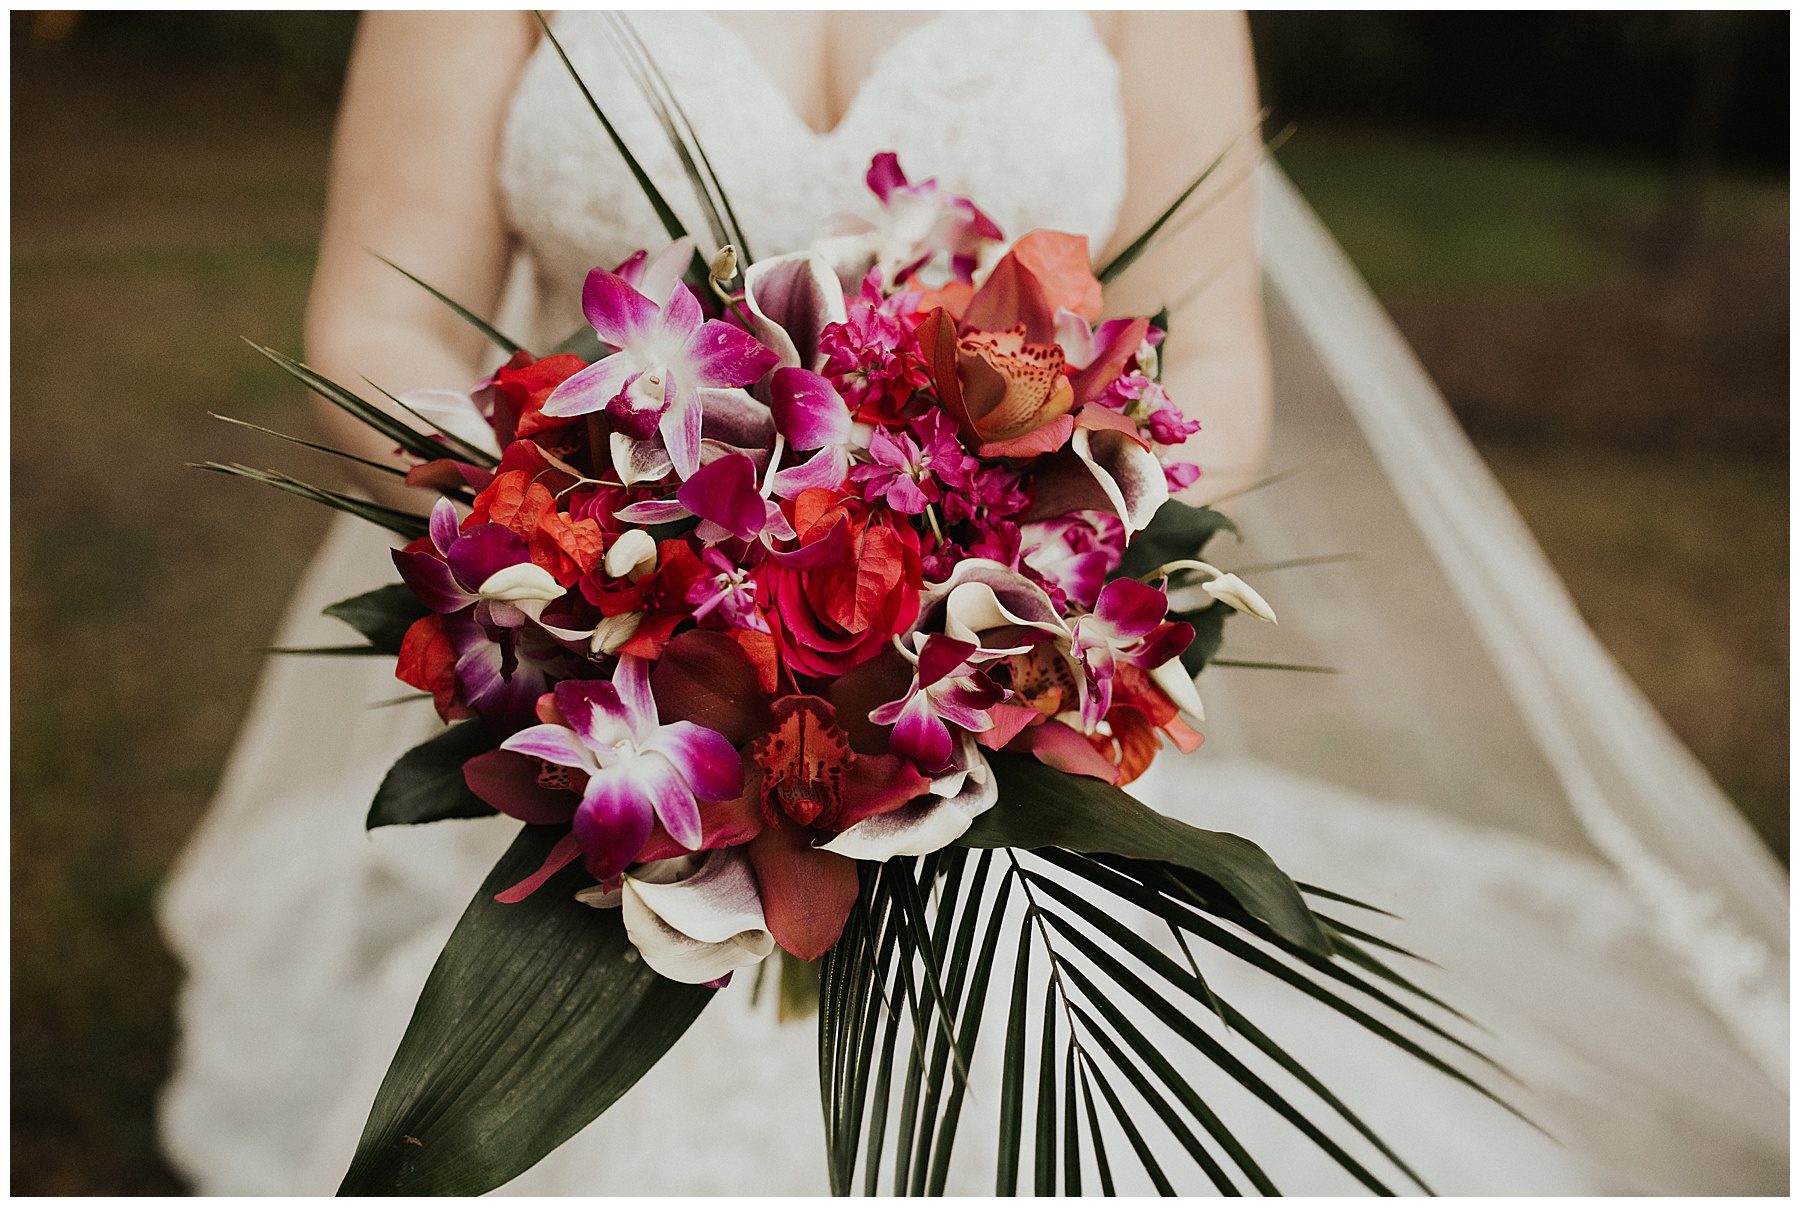 Tropical bouquet - Bride and groom portraits at sunset, in Dover Florida - Photographed by Juju Photography - Destination wedding photographer